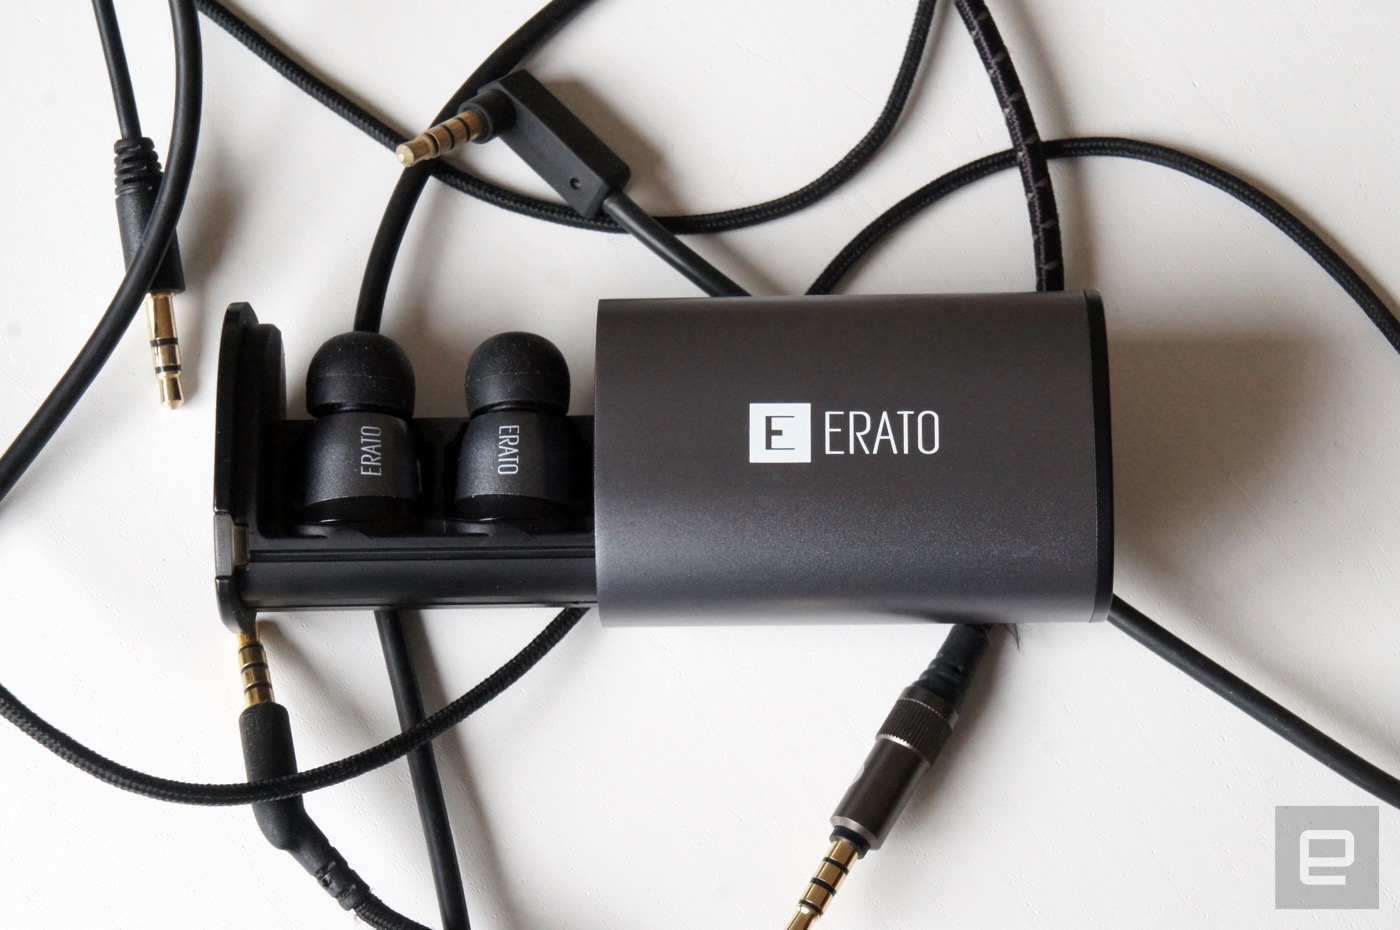 Erato is the next company trying &#039;truly wireless&#039; earbuds